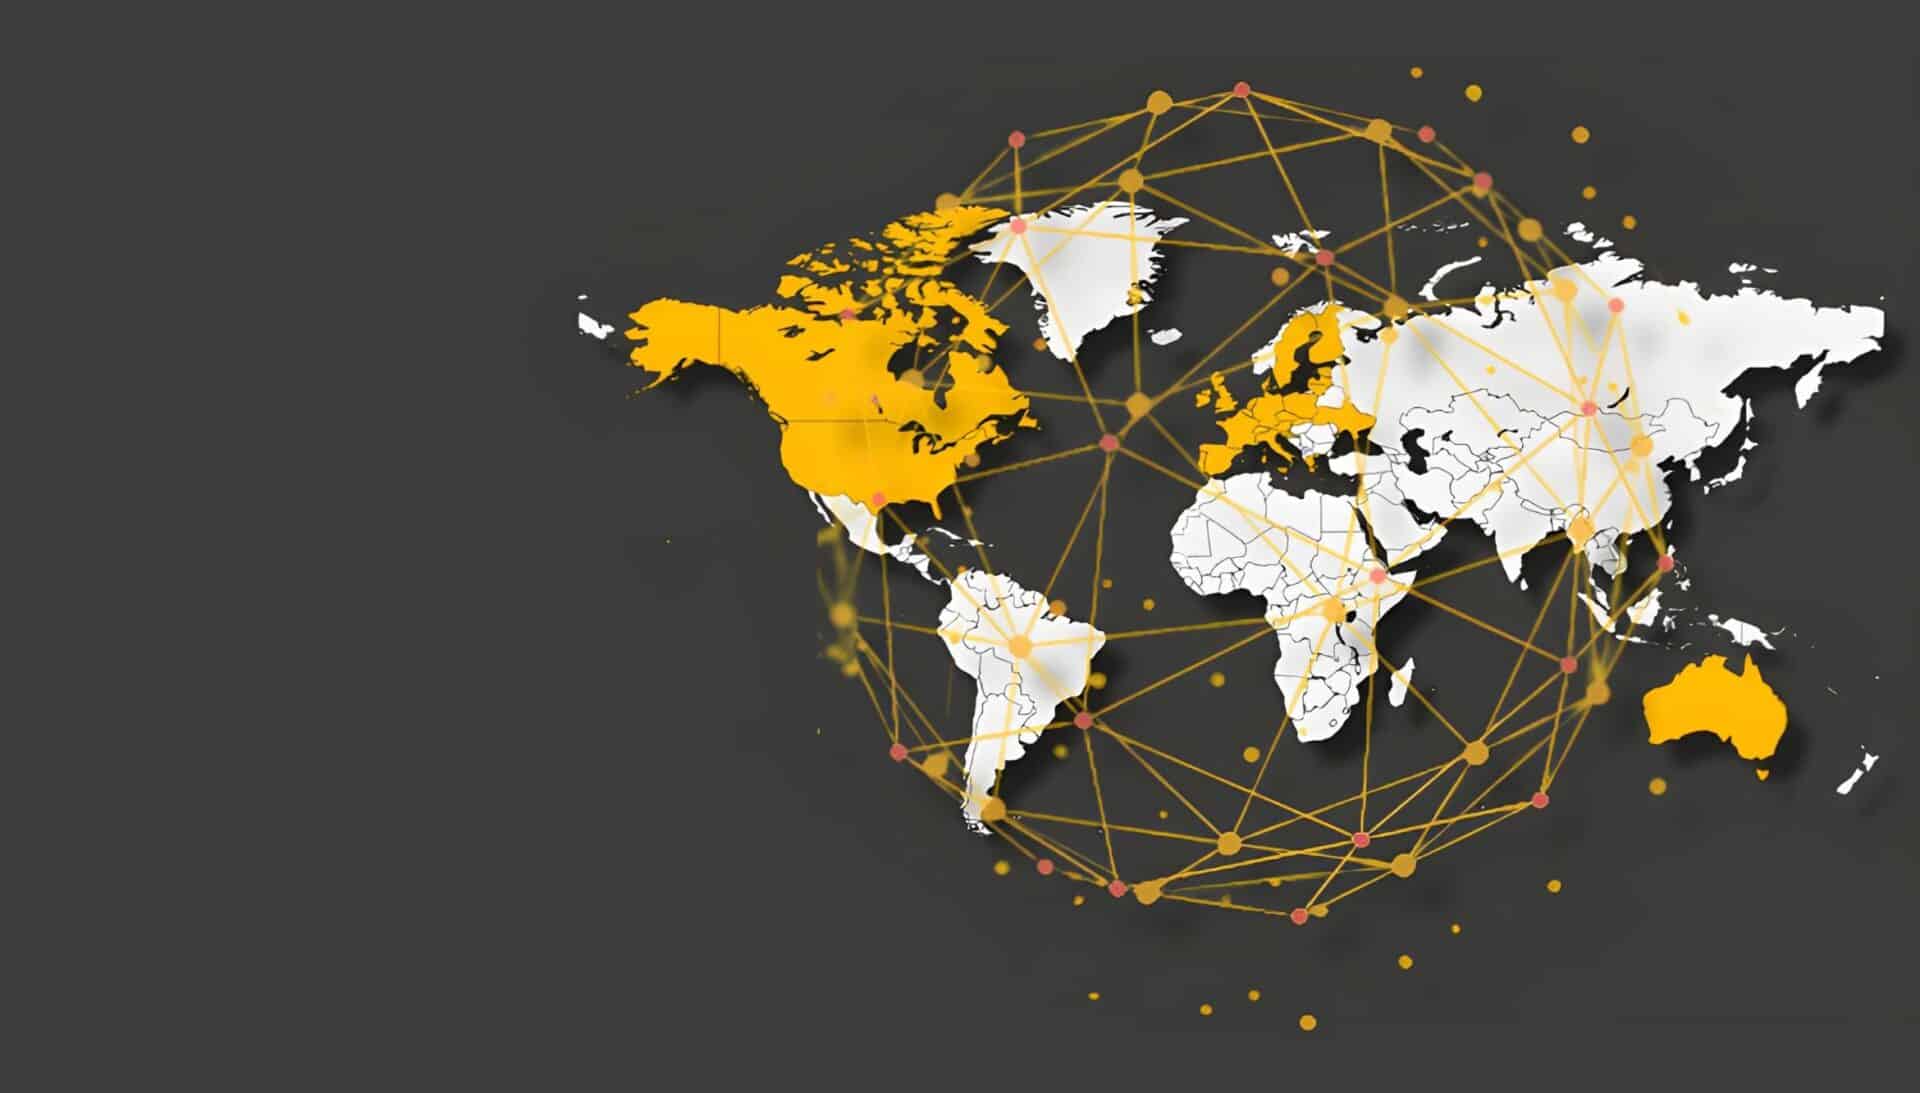 A world map with yellow dots and lines indicating connections and locations